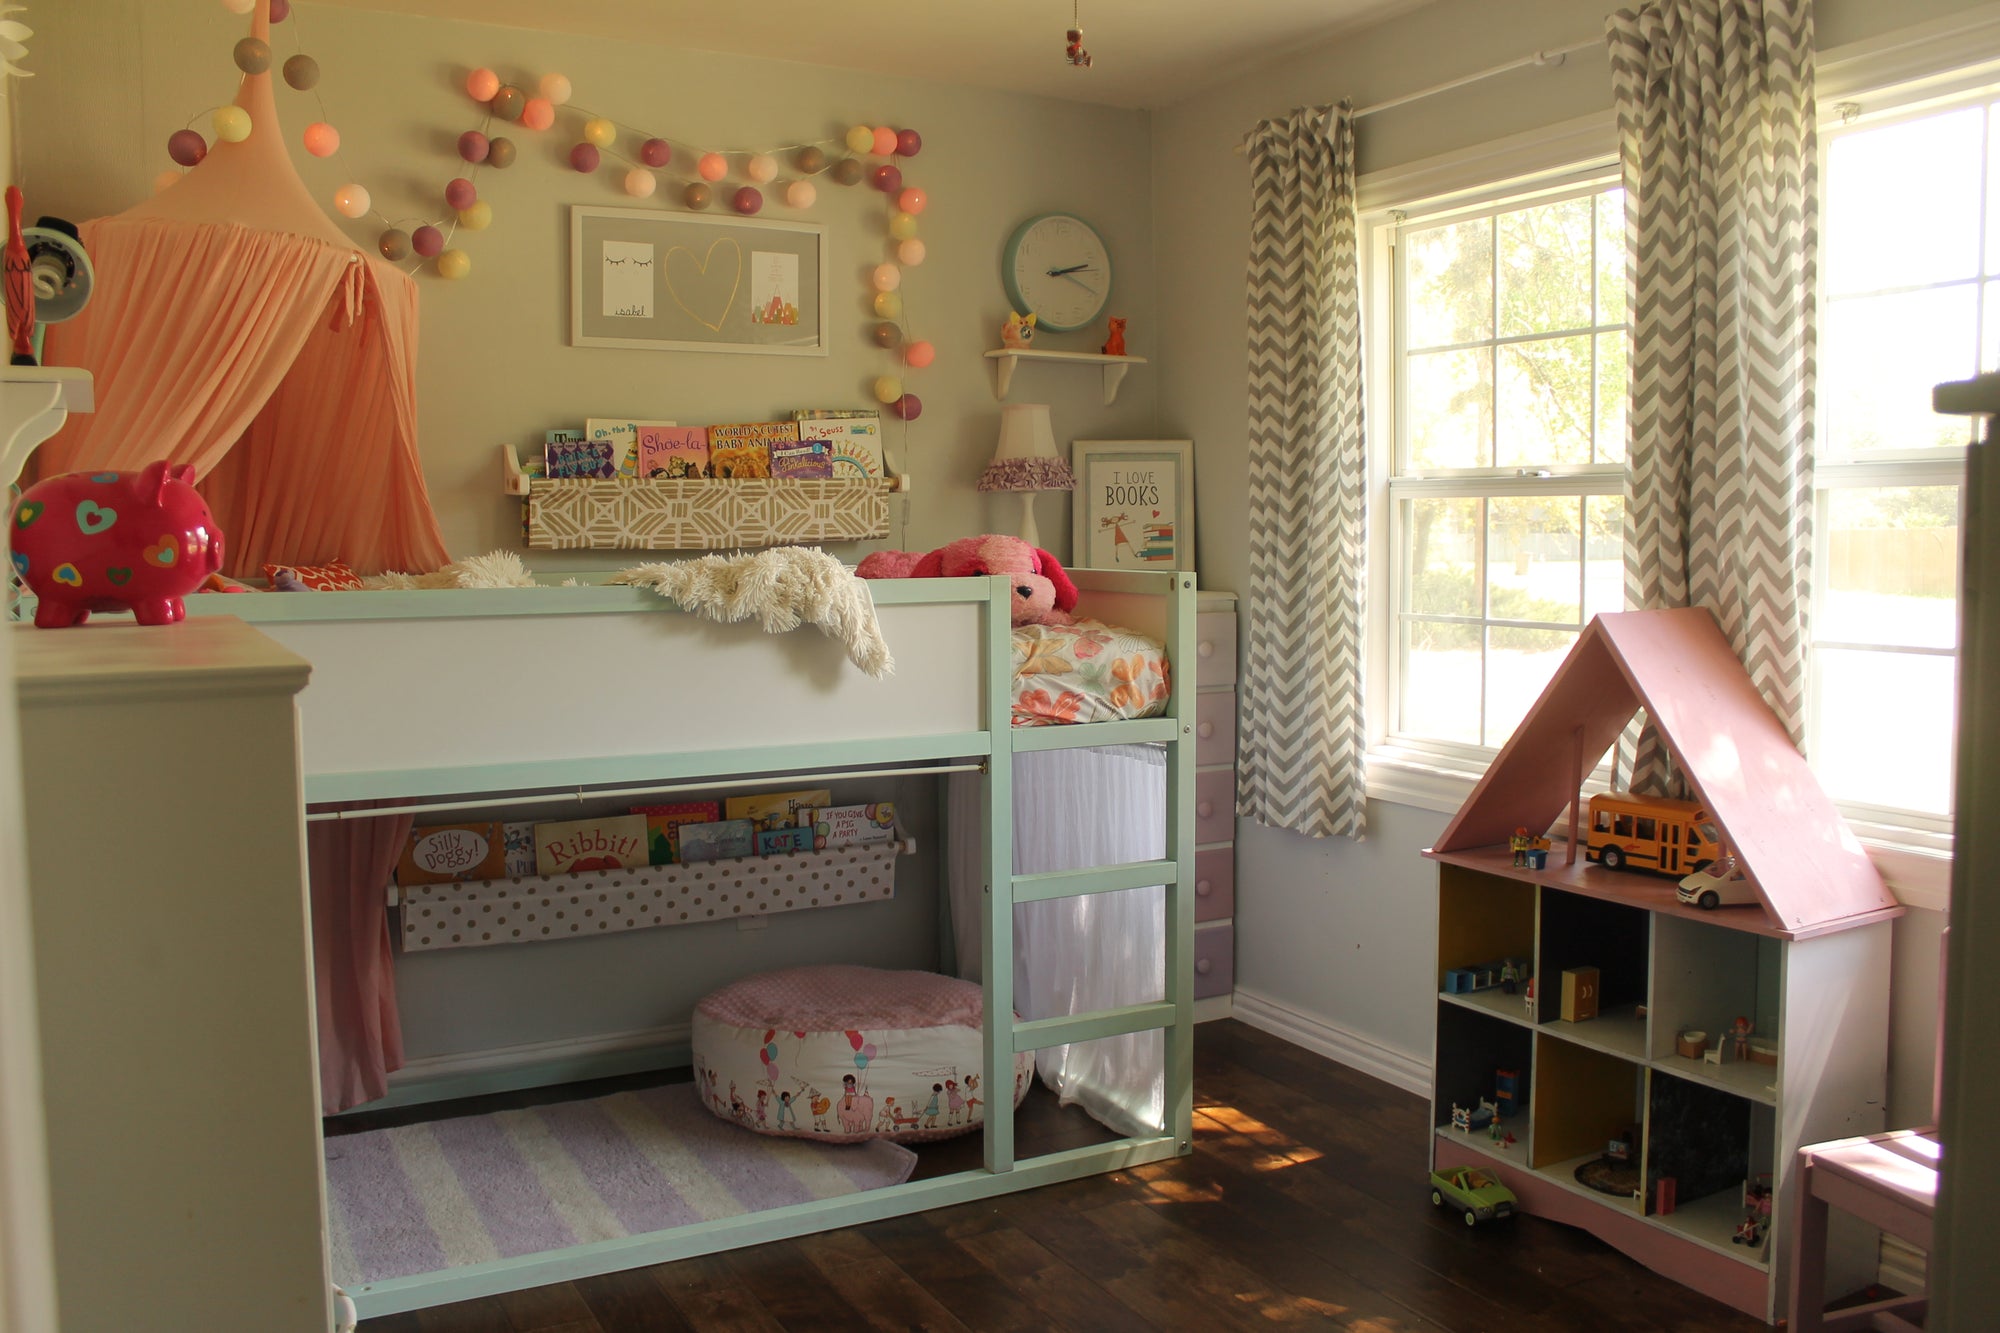 Kids Room Inspiration - for young girl